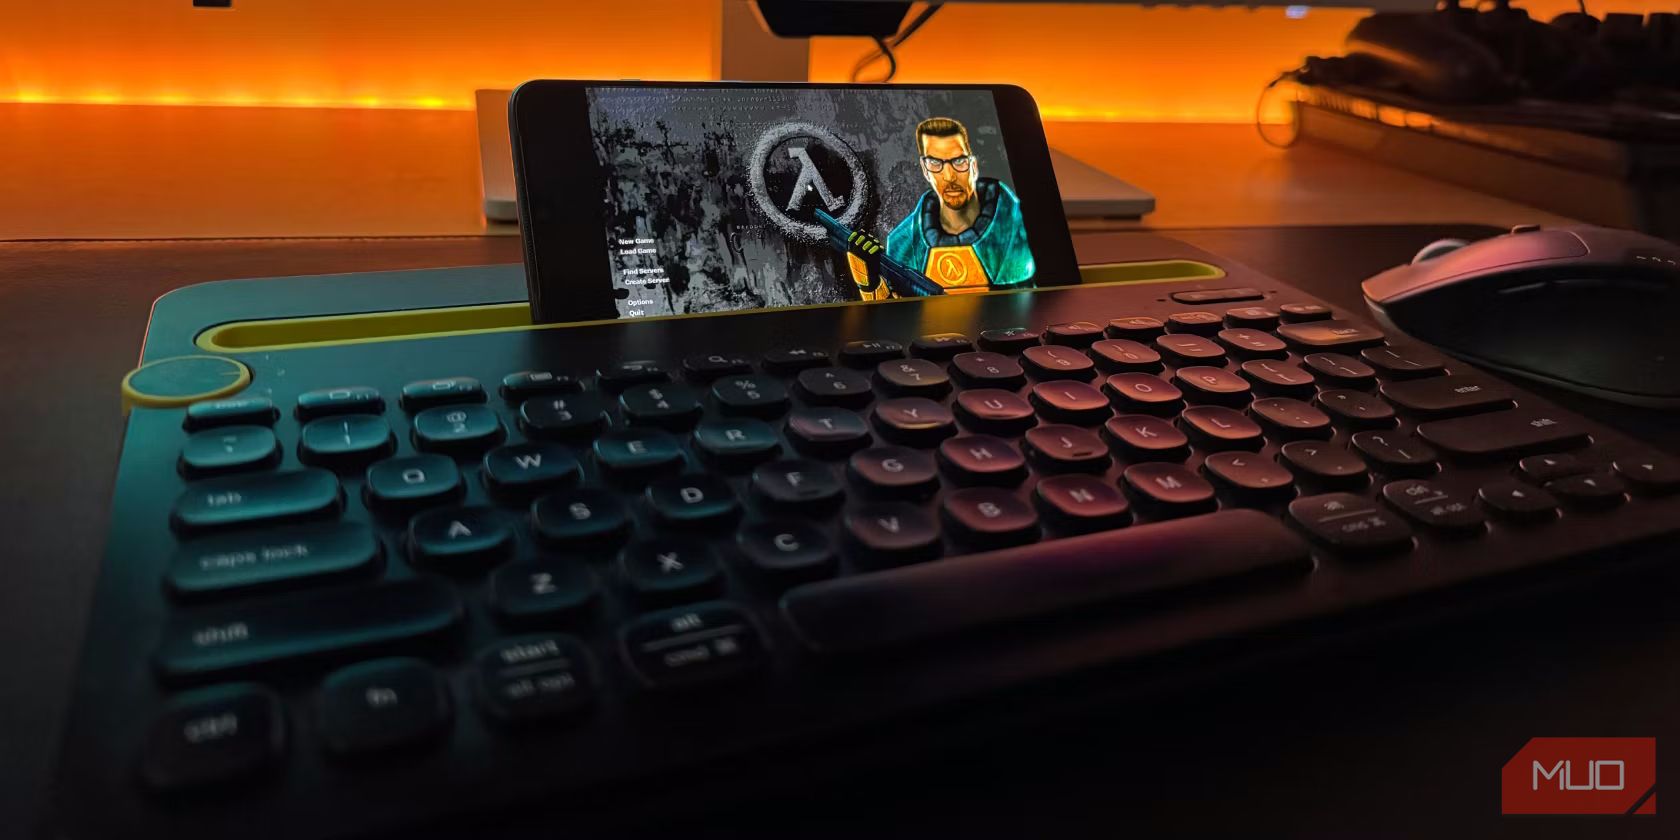 Android phone running Half Life with a keyboard and mouse connected